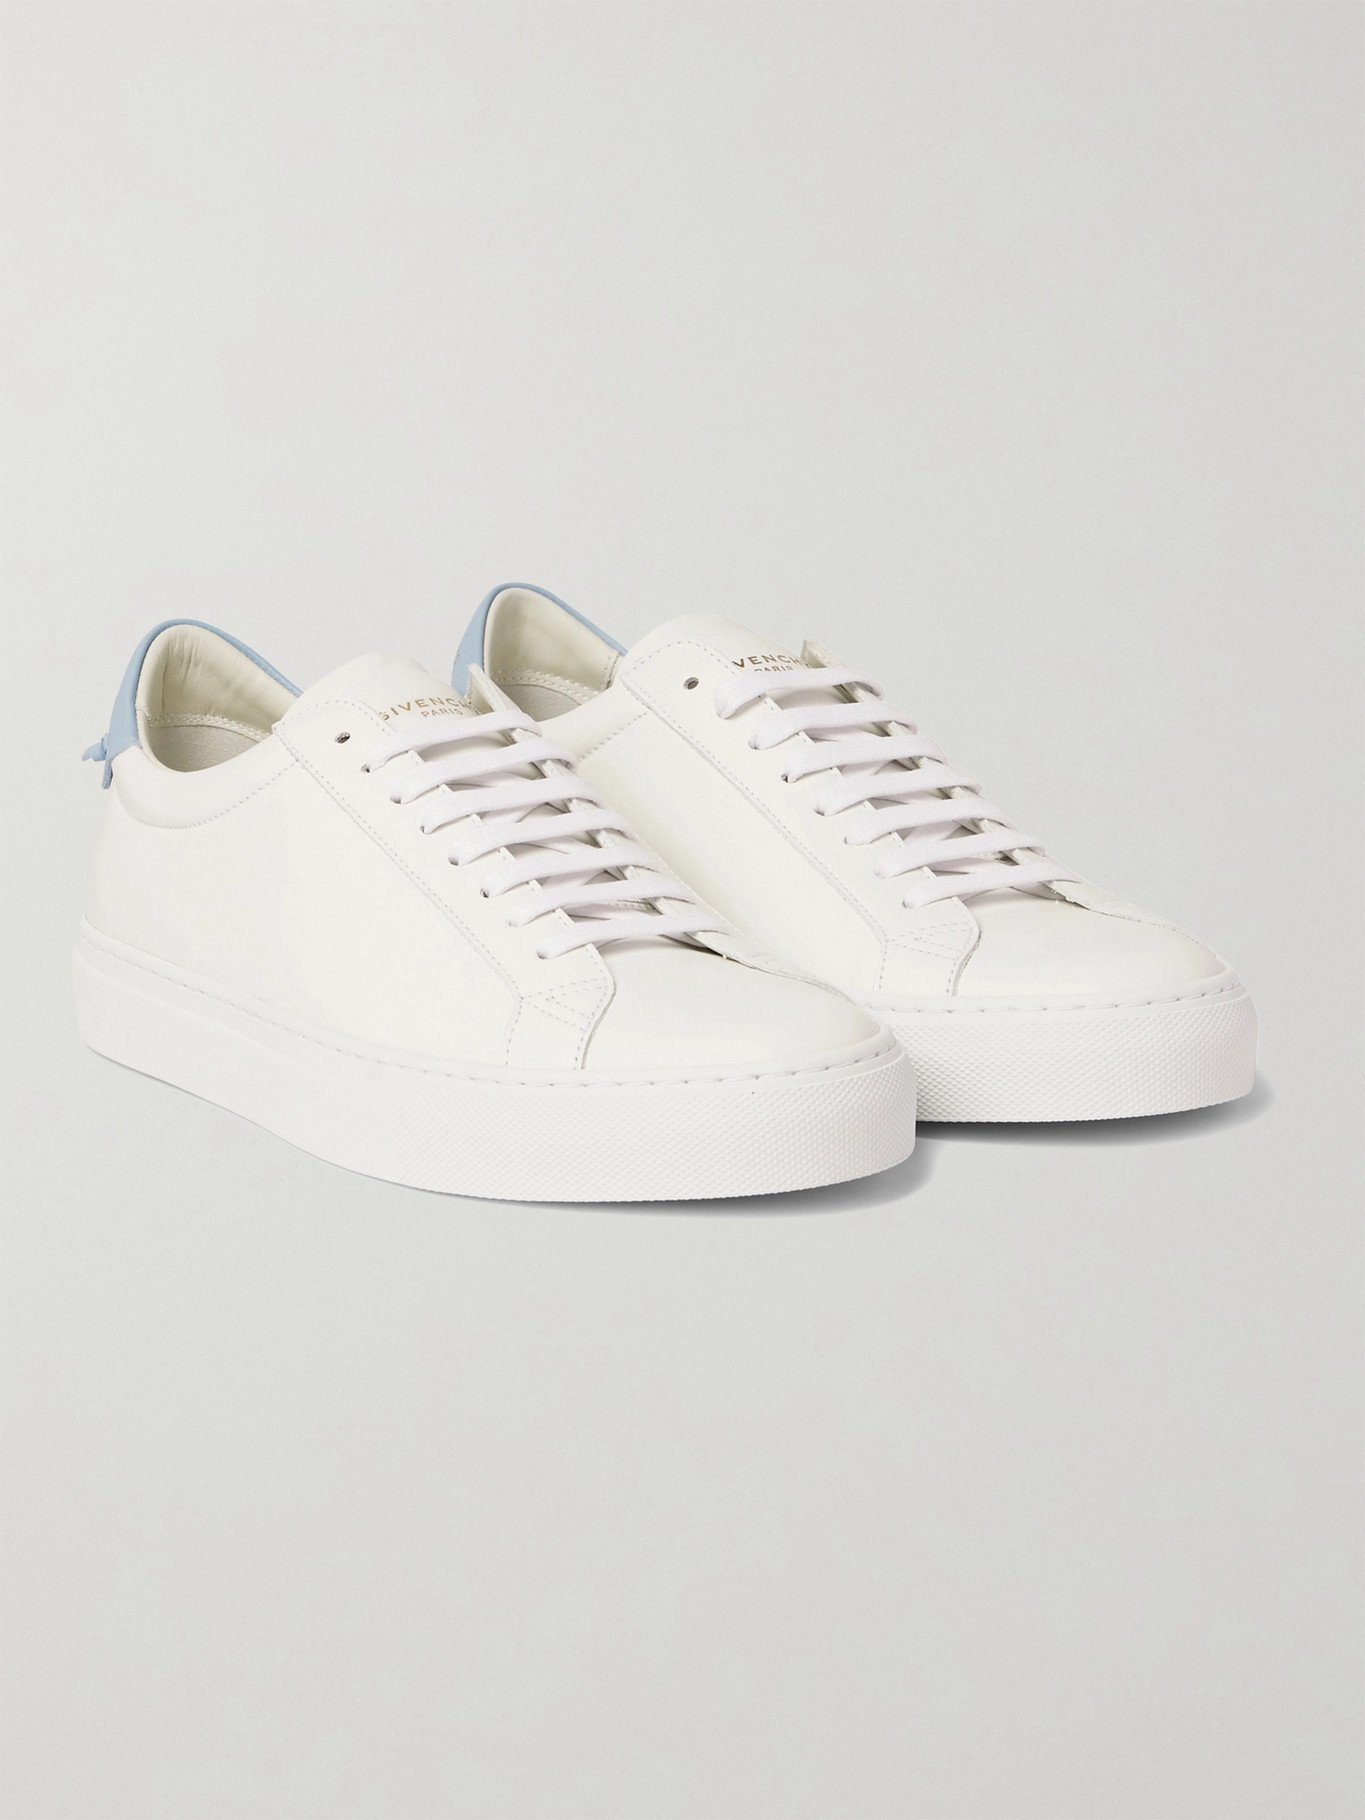 GIVENCHY - Urban Street Leather Sneakers - White Givenchy